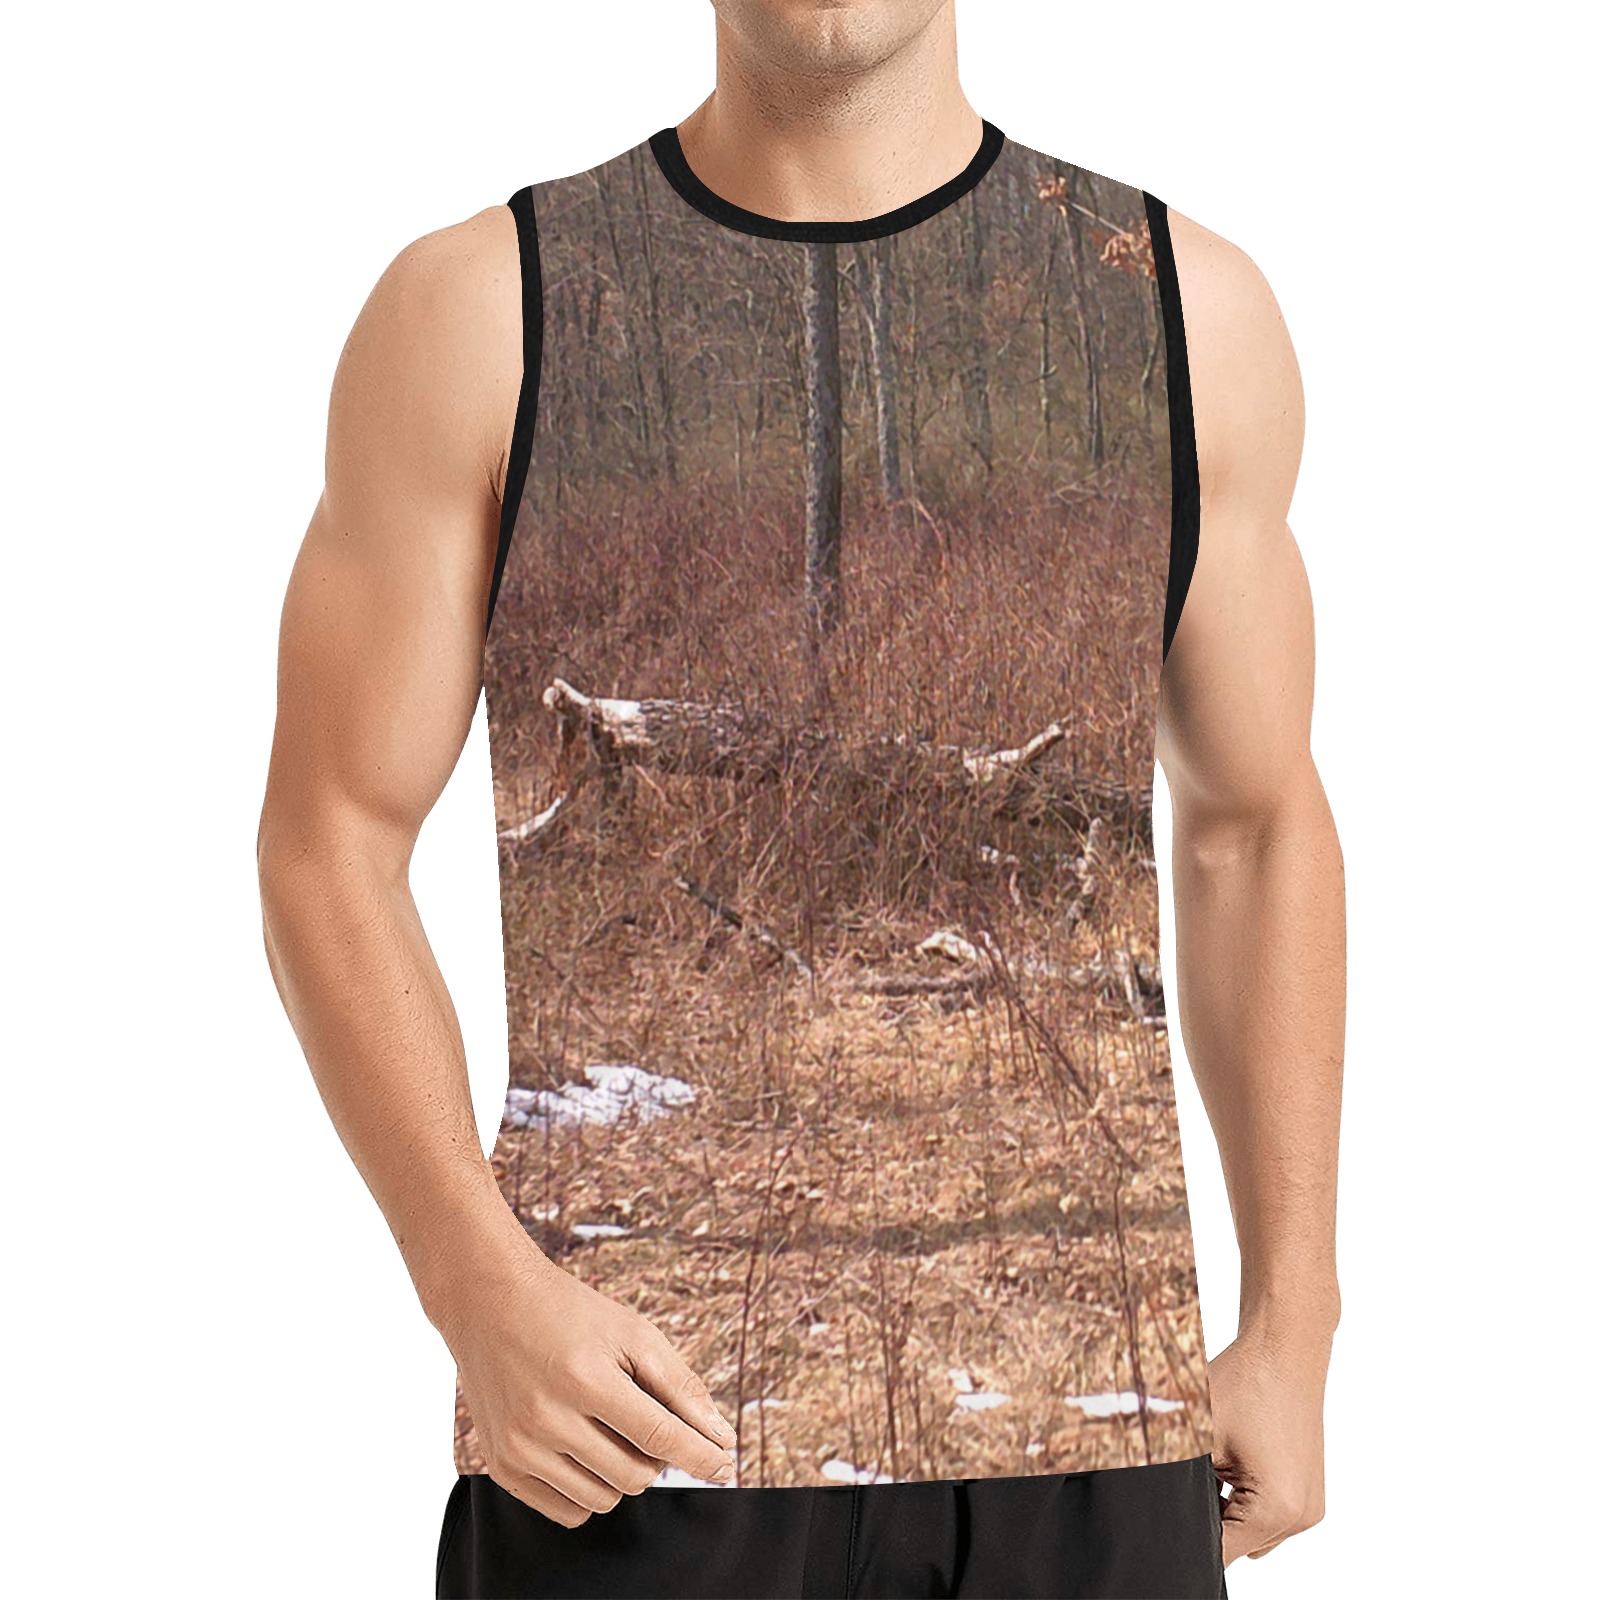 Falling tree in the woods All Over Print Basketball Jersey